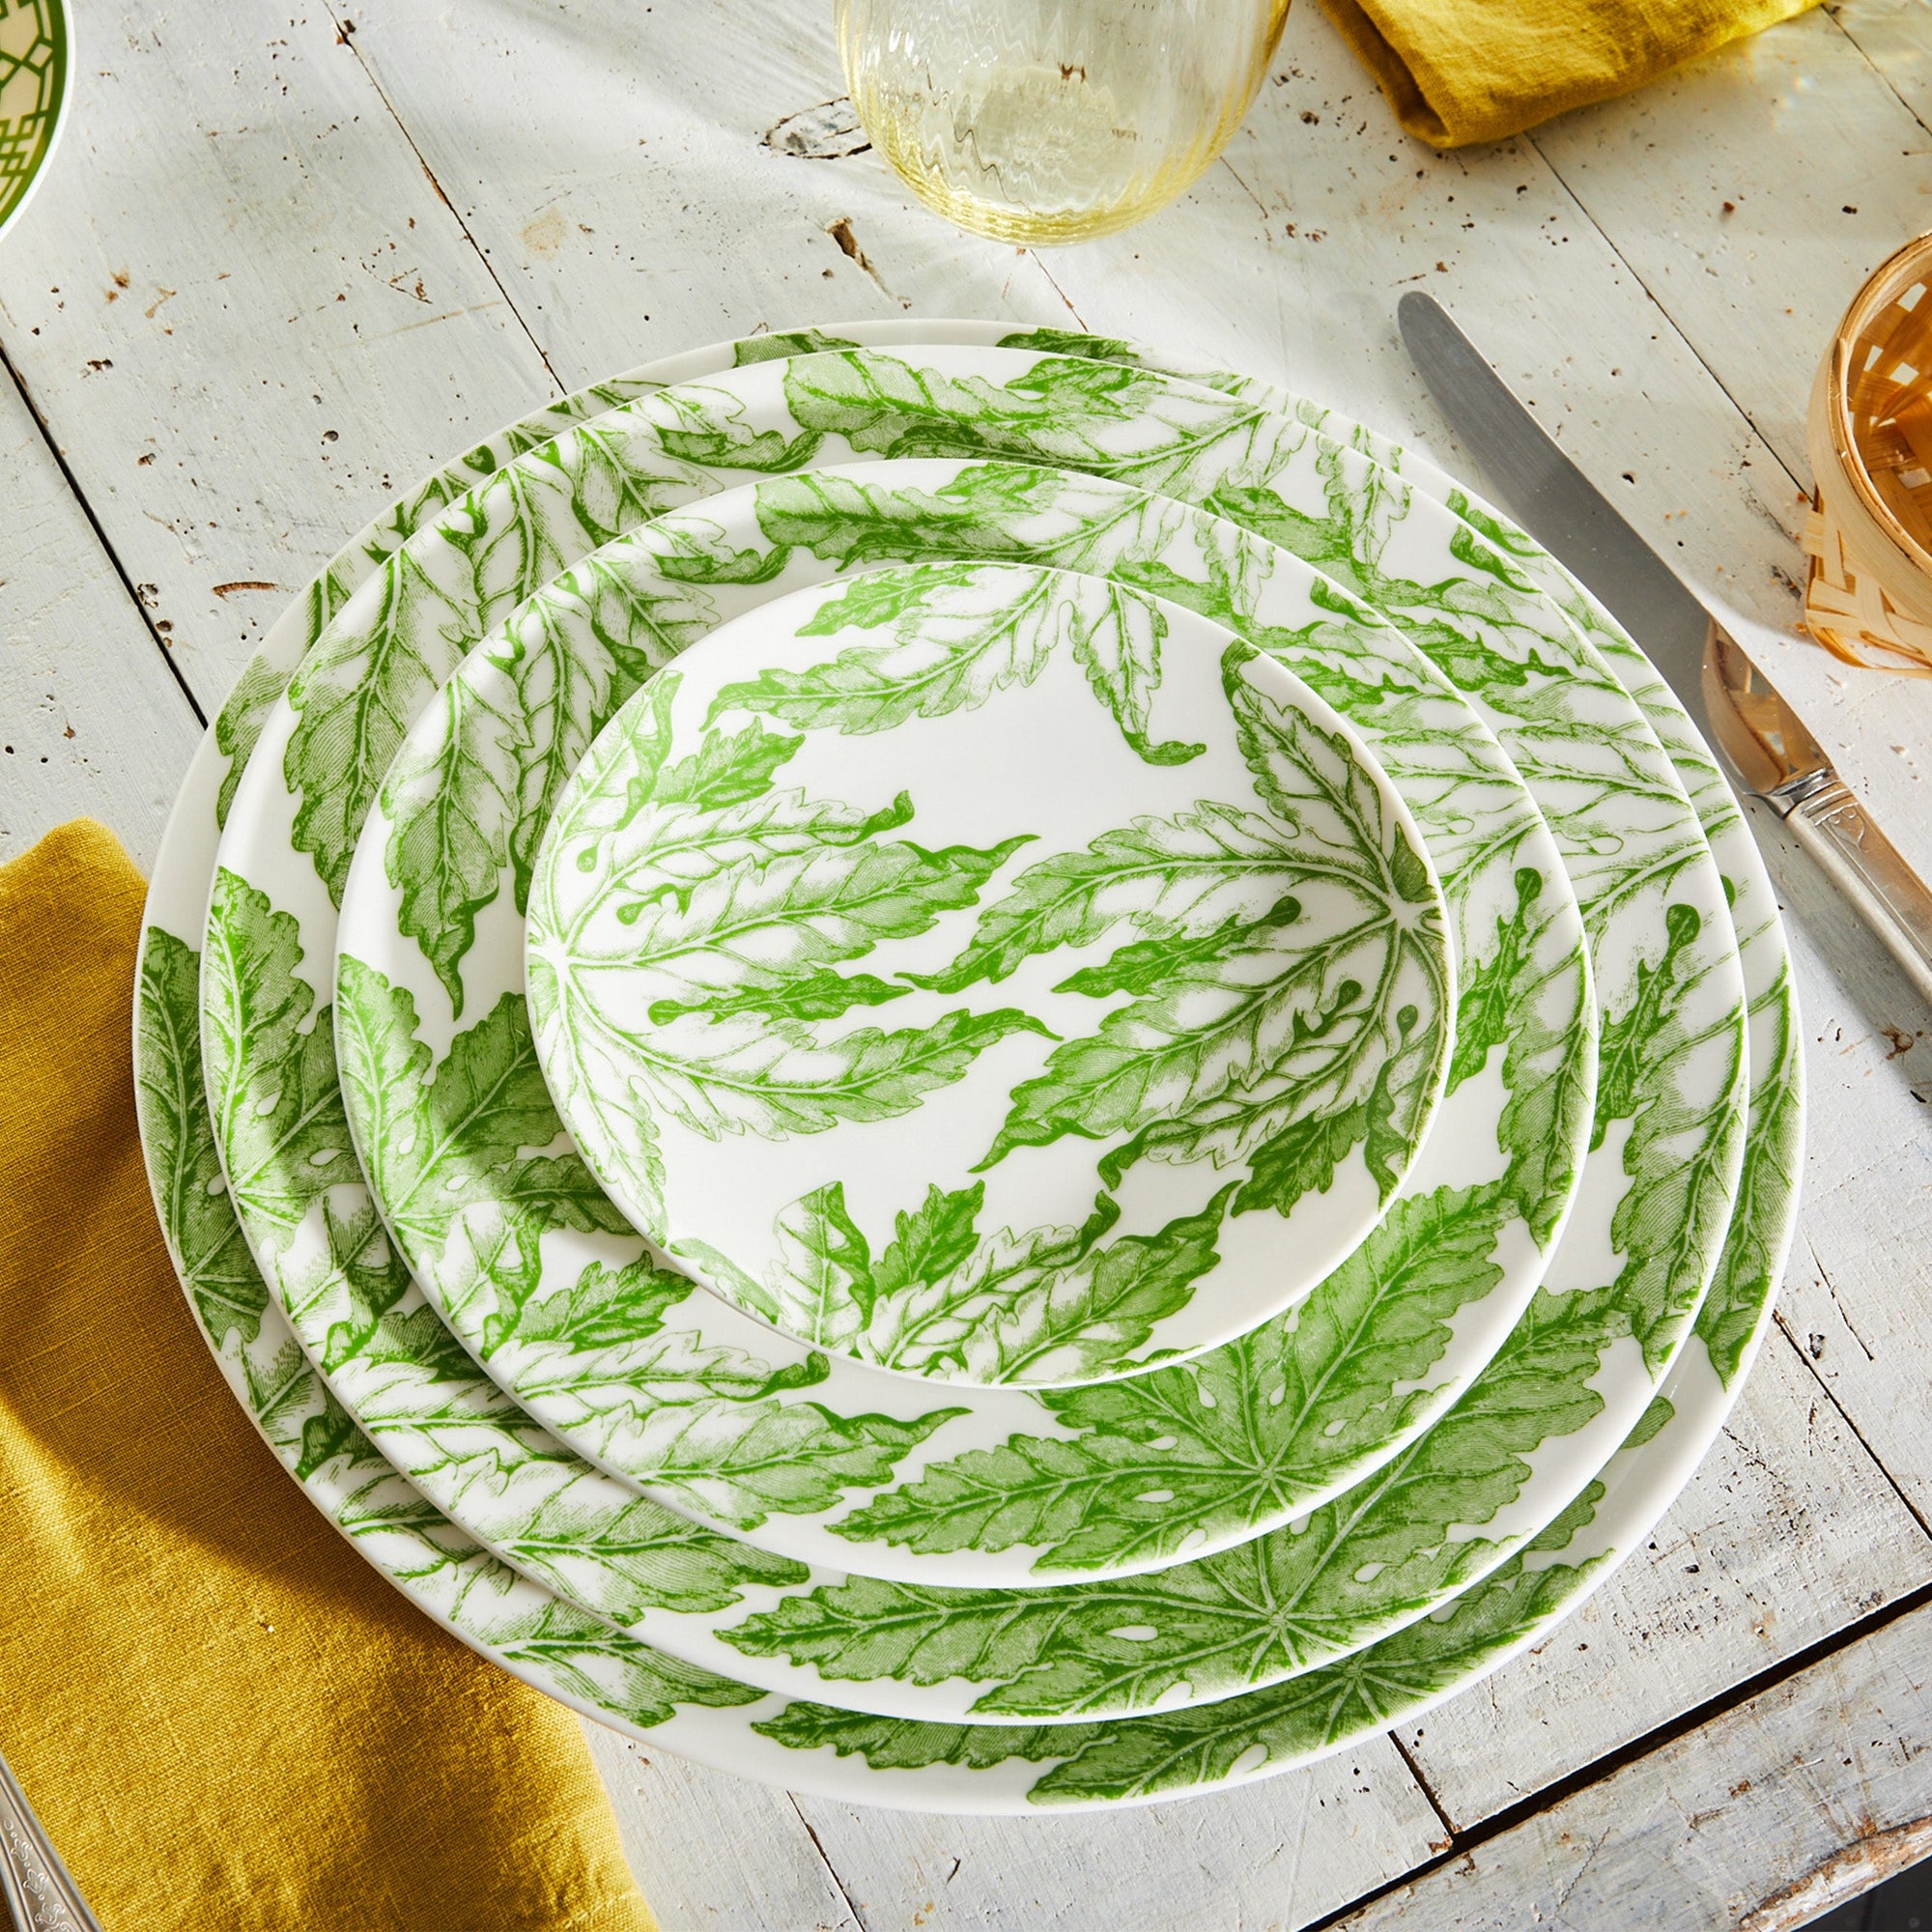 A white ceramic plate featuring green leafy designs around the rim brings to mind a Freya Rimmed Charger Plate by Caskata Artisanal Home worthy of the goddess of love.